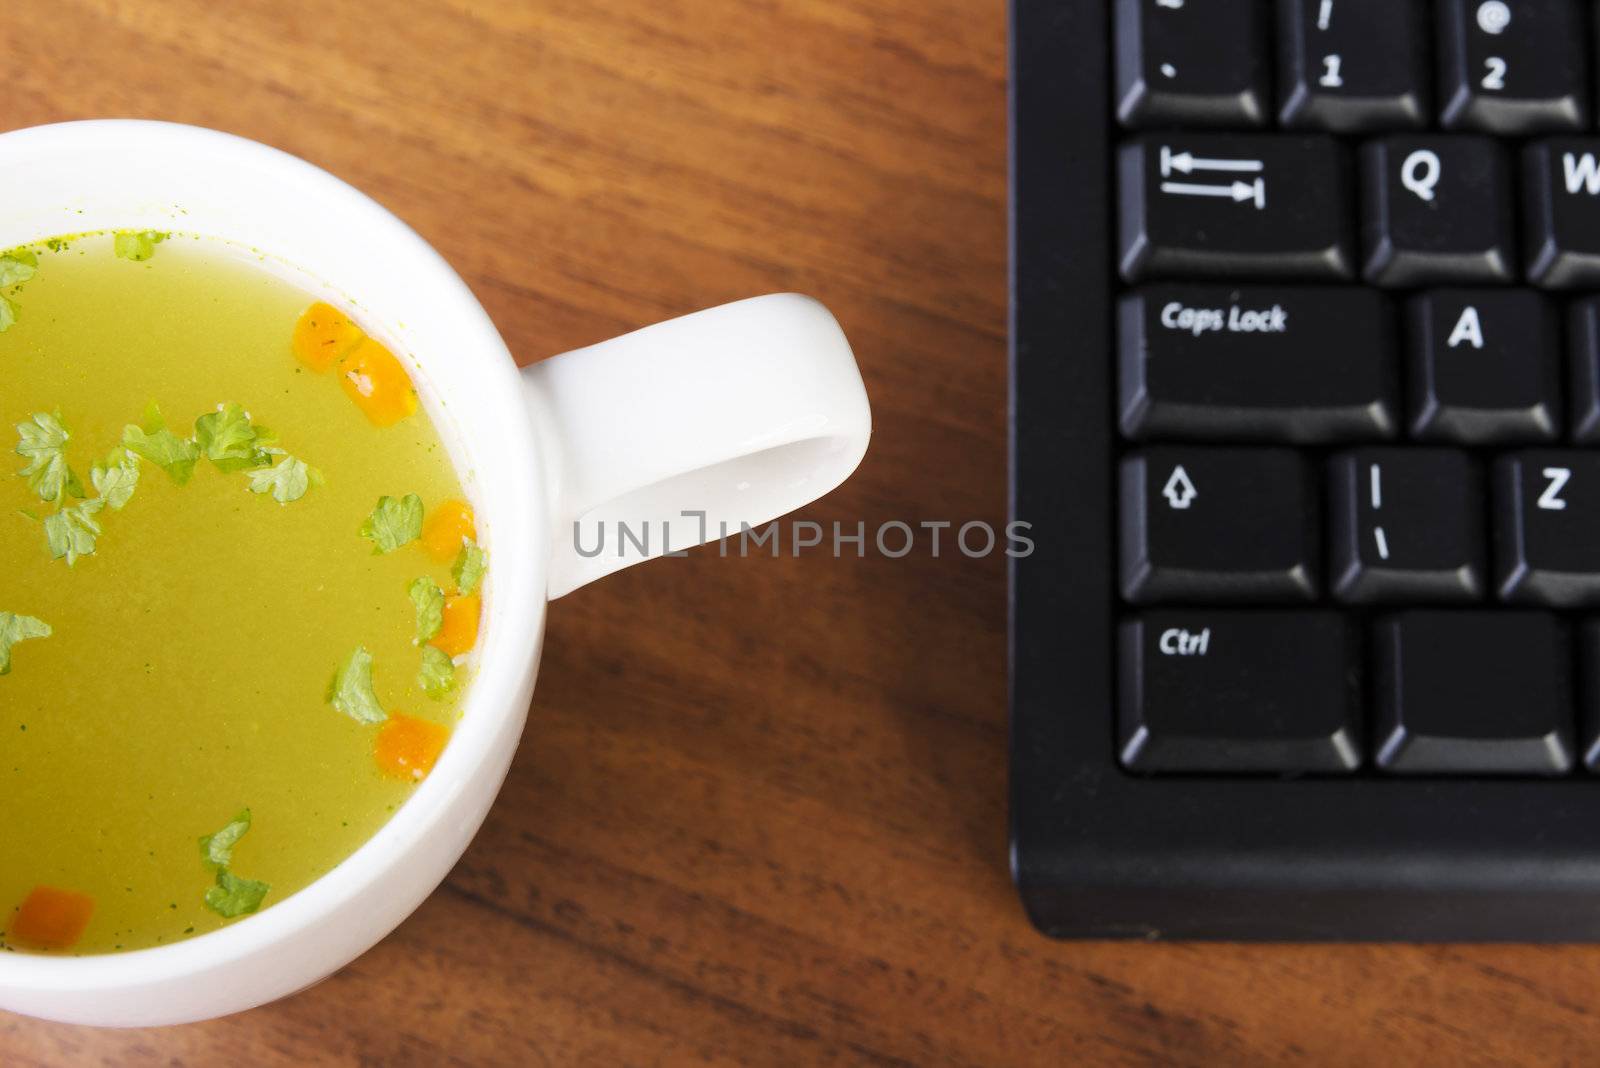 Hot soup cup at work.